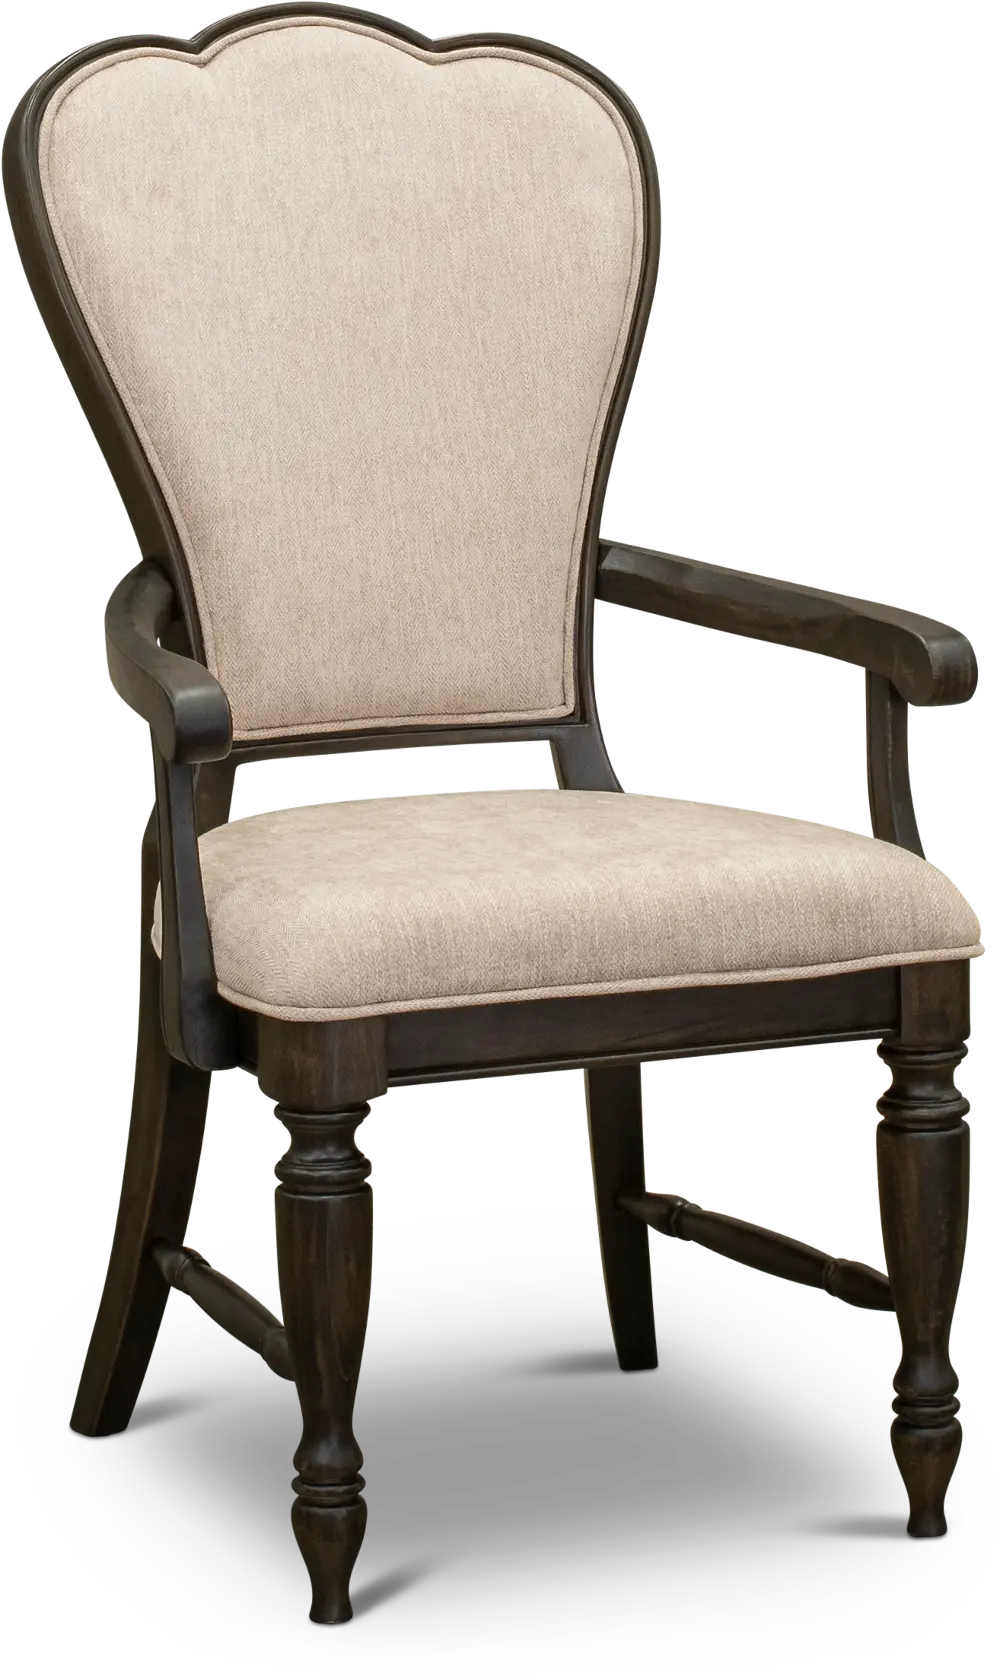 Traditional Antique Black Upholstered Dining Arm Chair - Natchez Trace-1